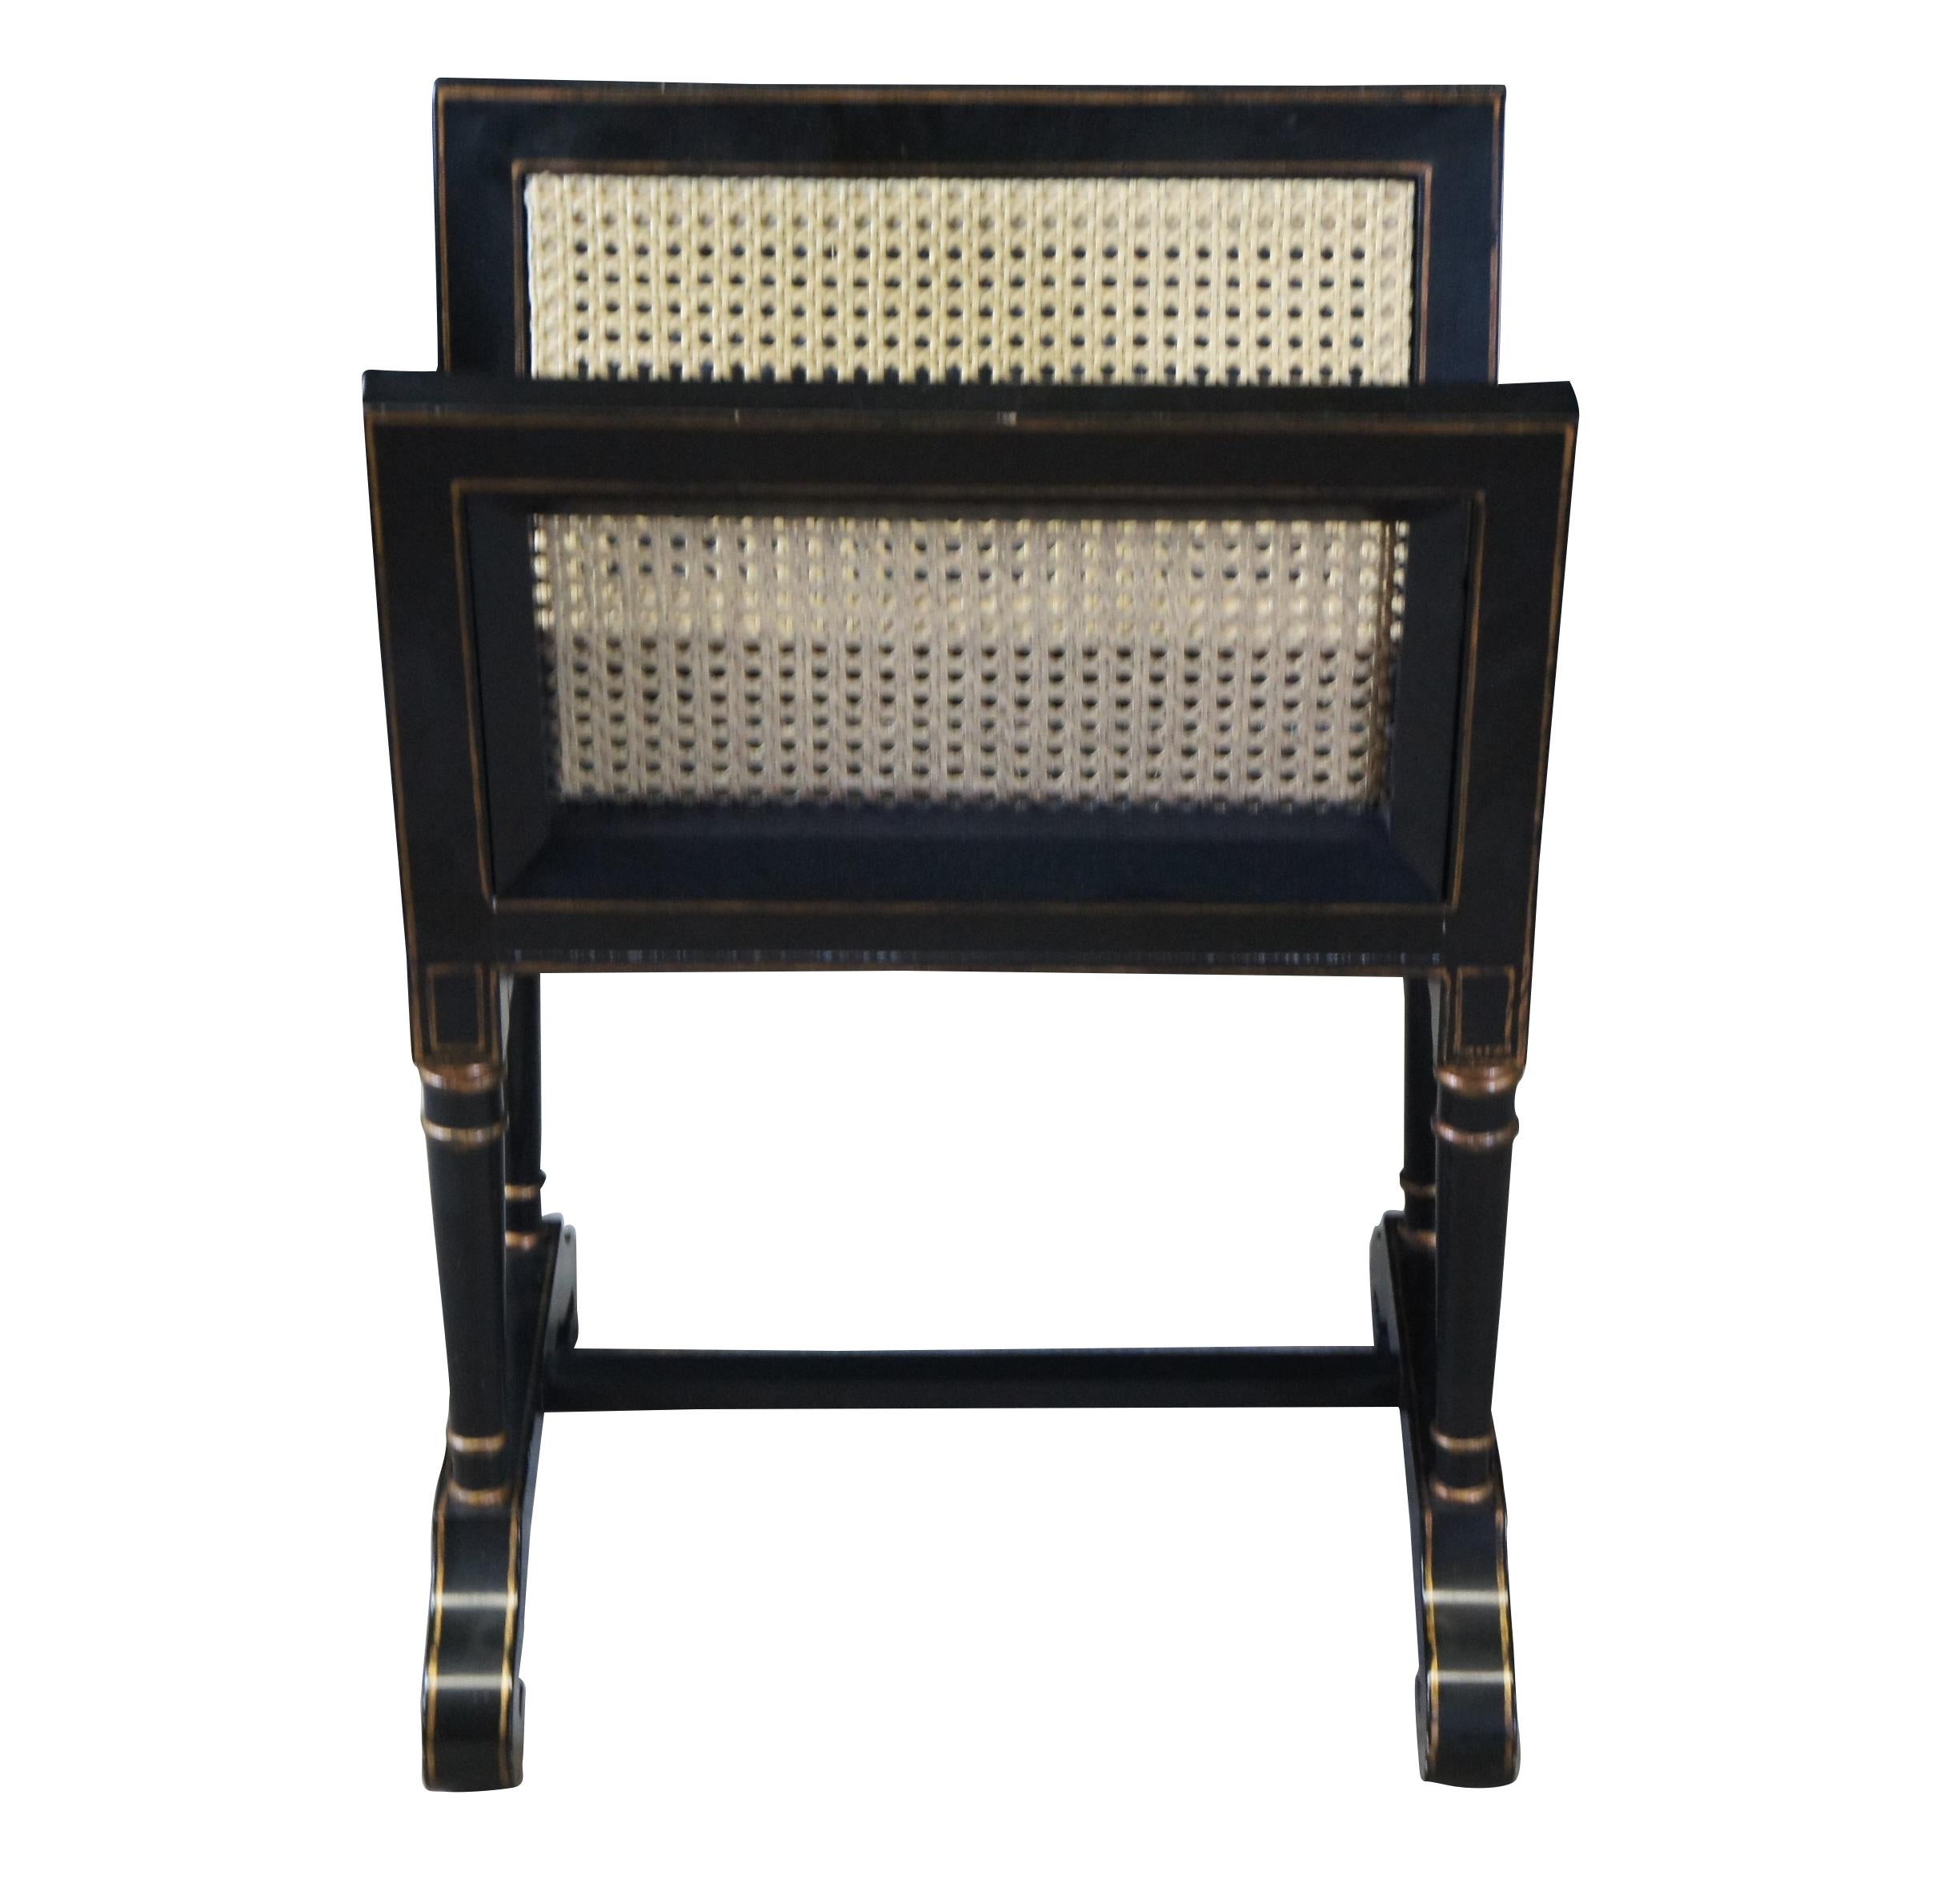 Vintage French Empire Napoleon Style Ebonized Oak & Cane Magazine Rack Stand In Good Condition For Sale In Dayton, OH